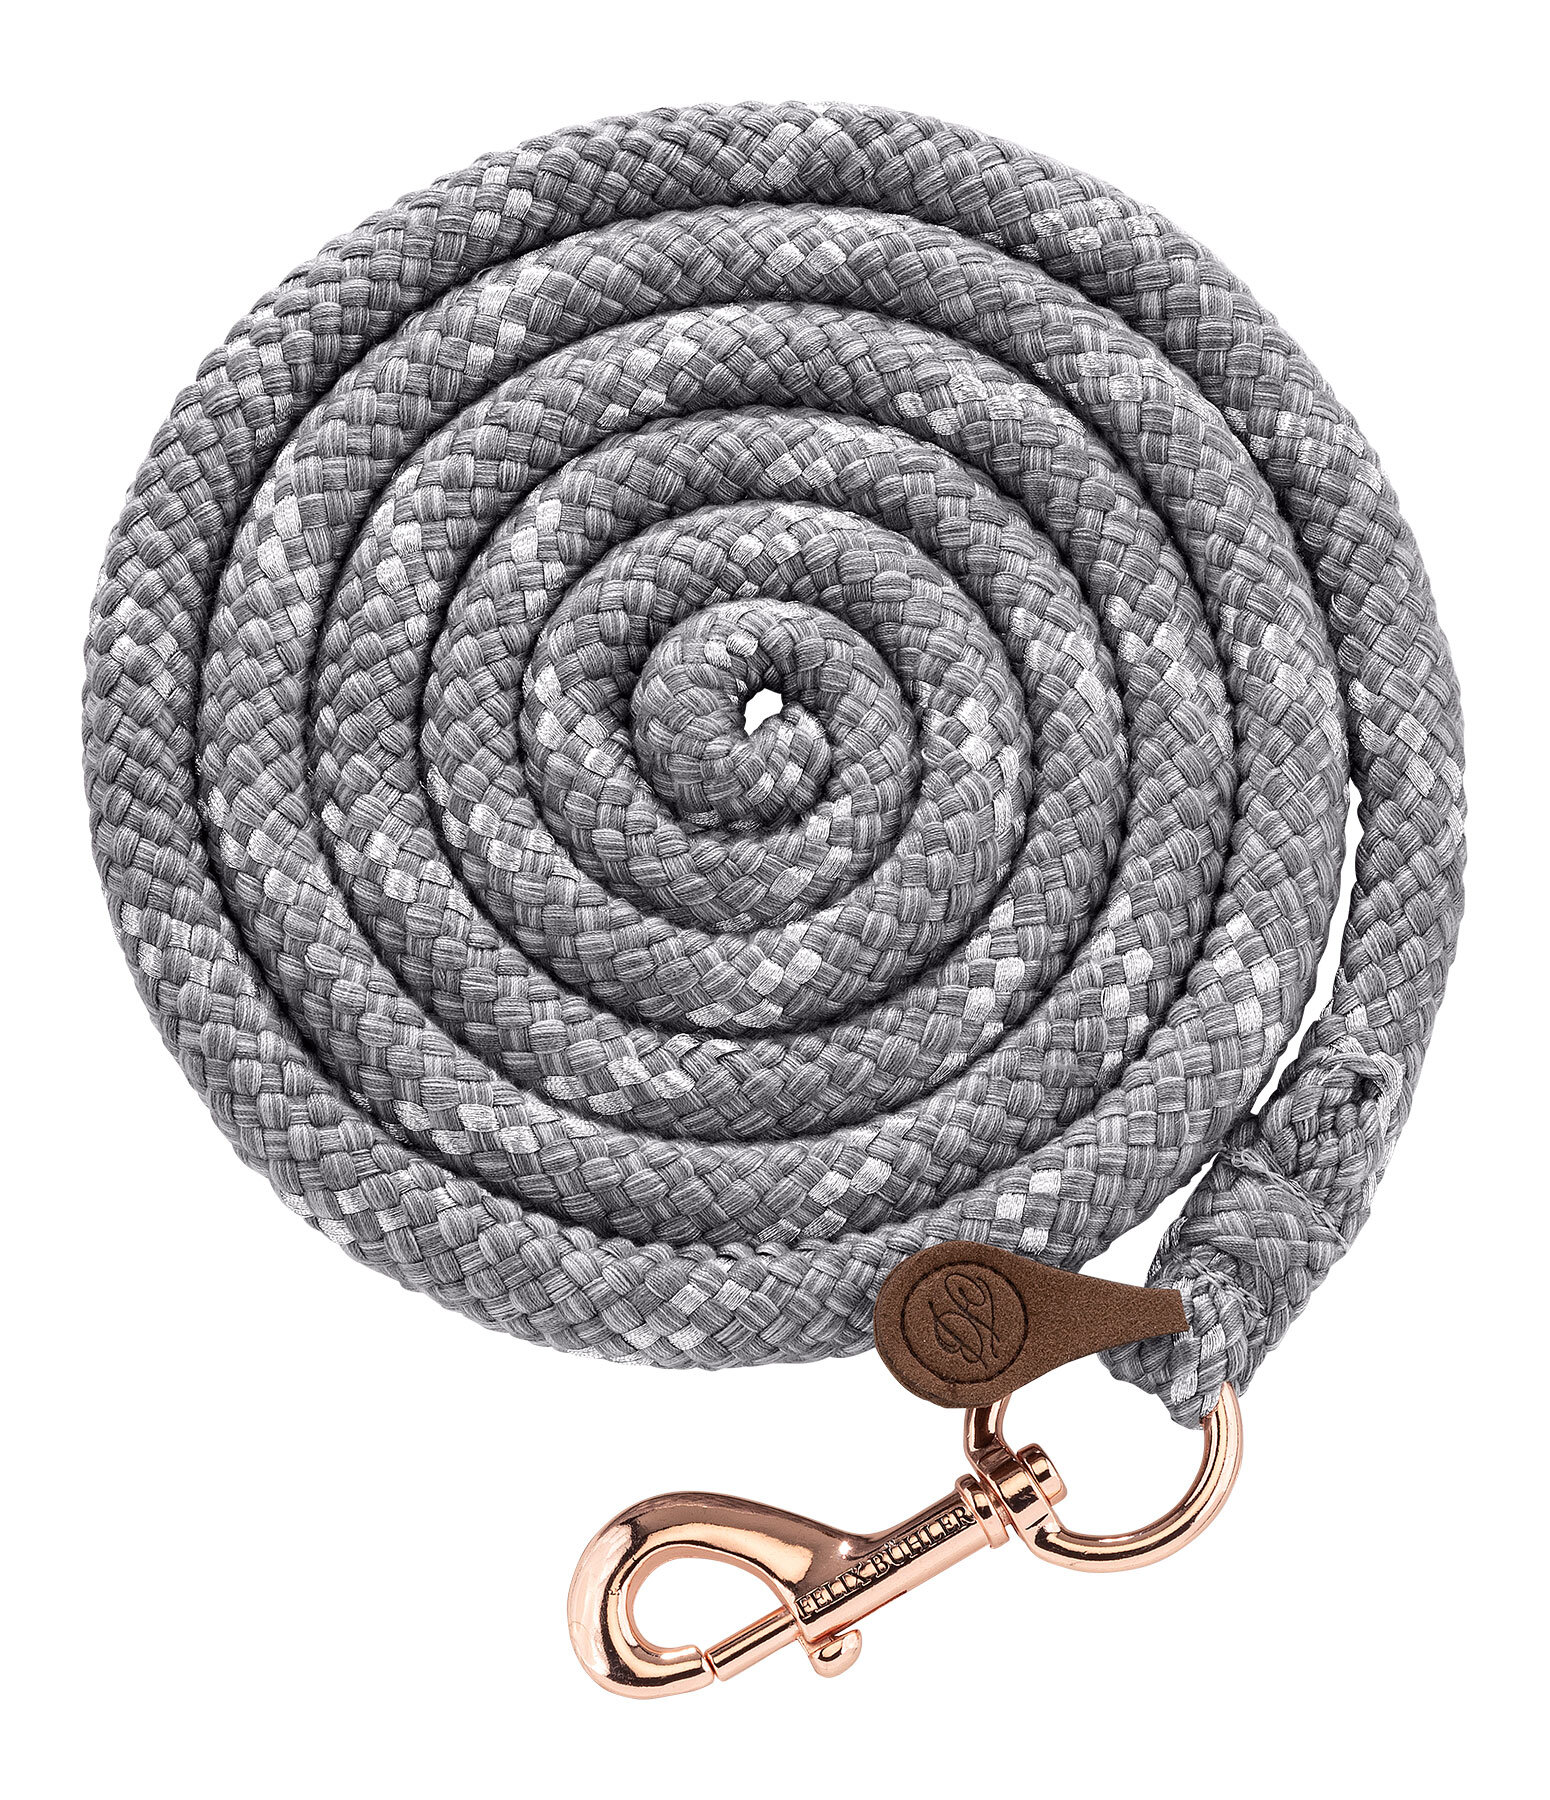 Lead Rope Knitted, with Snap Hook